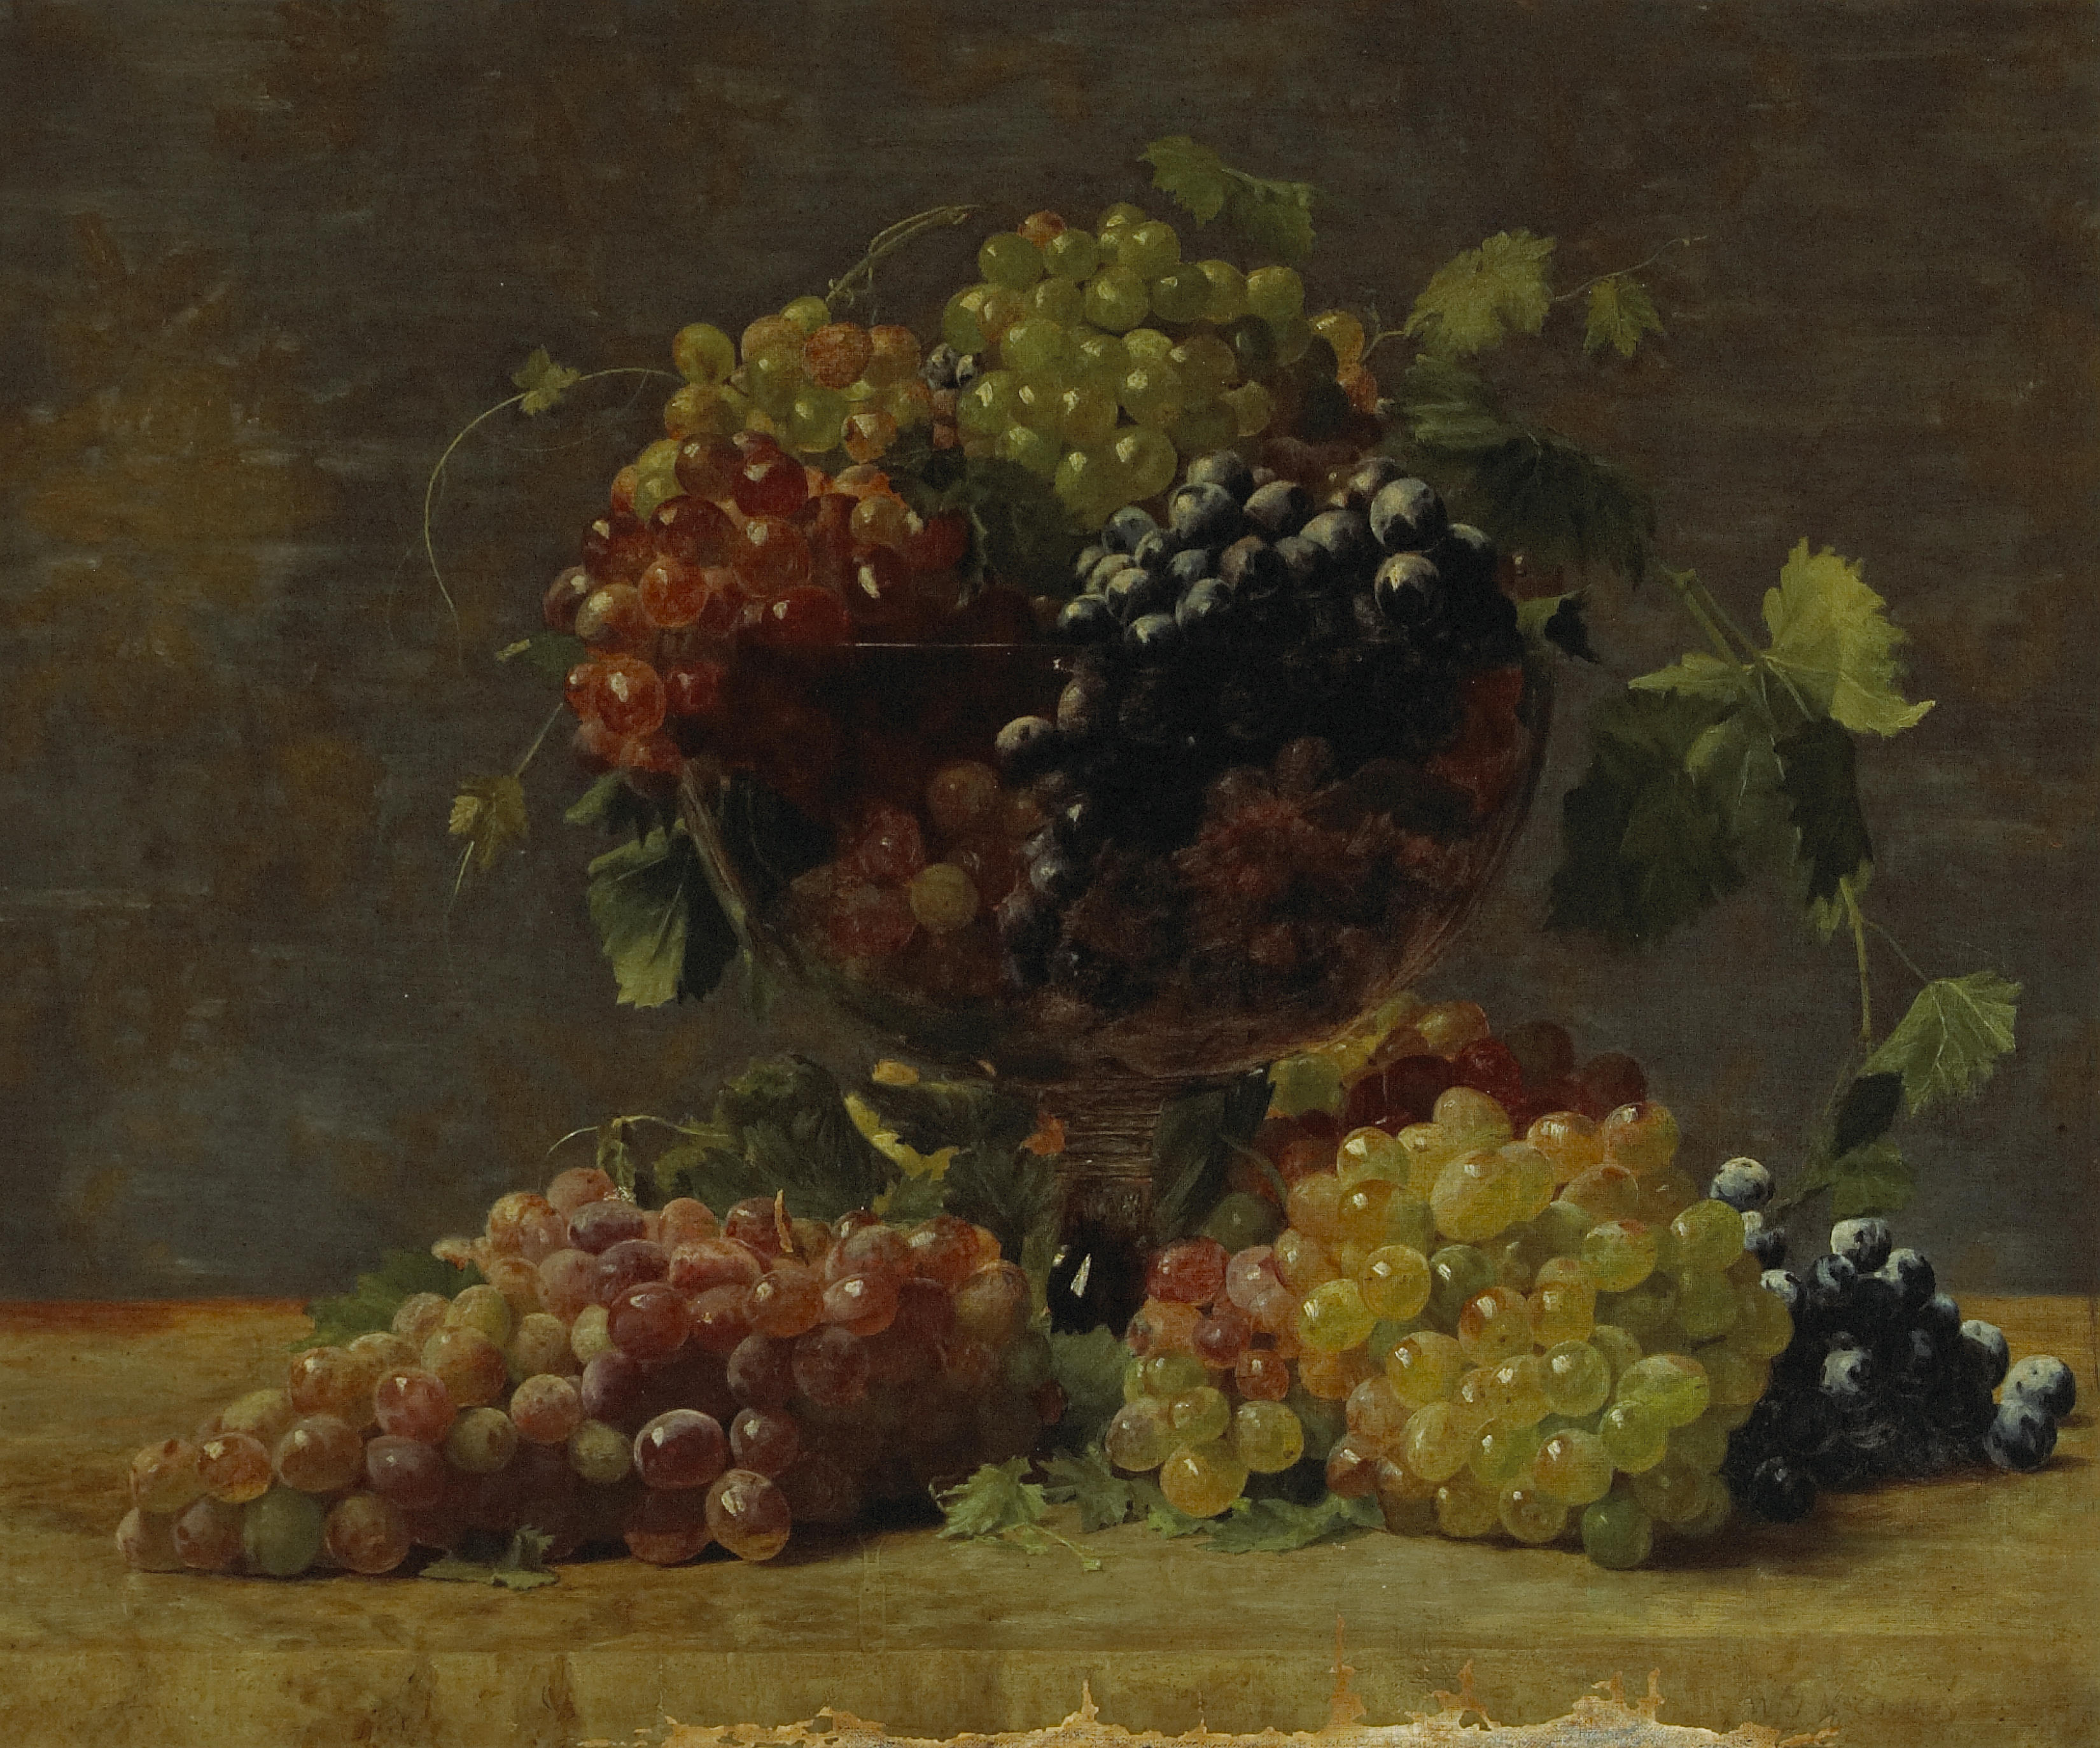 William J. McCloskey - A Variety of California Grapes in a Glass Vase